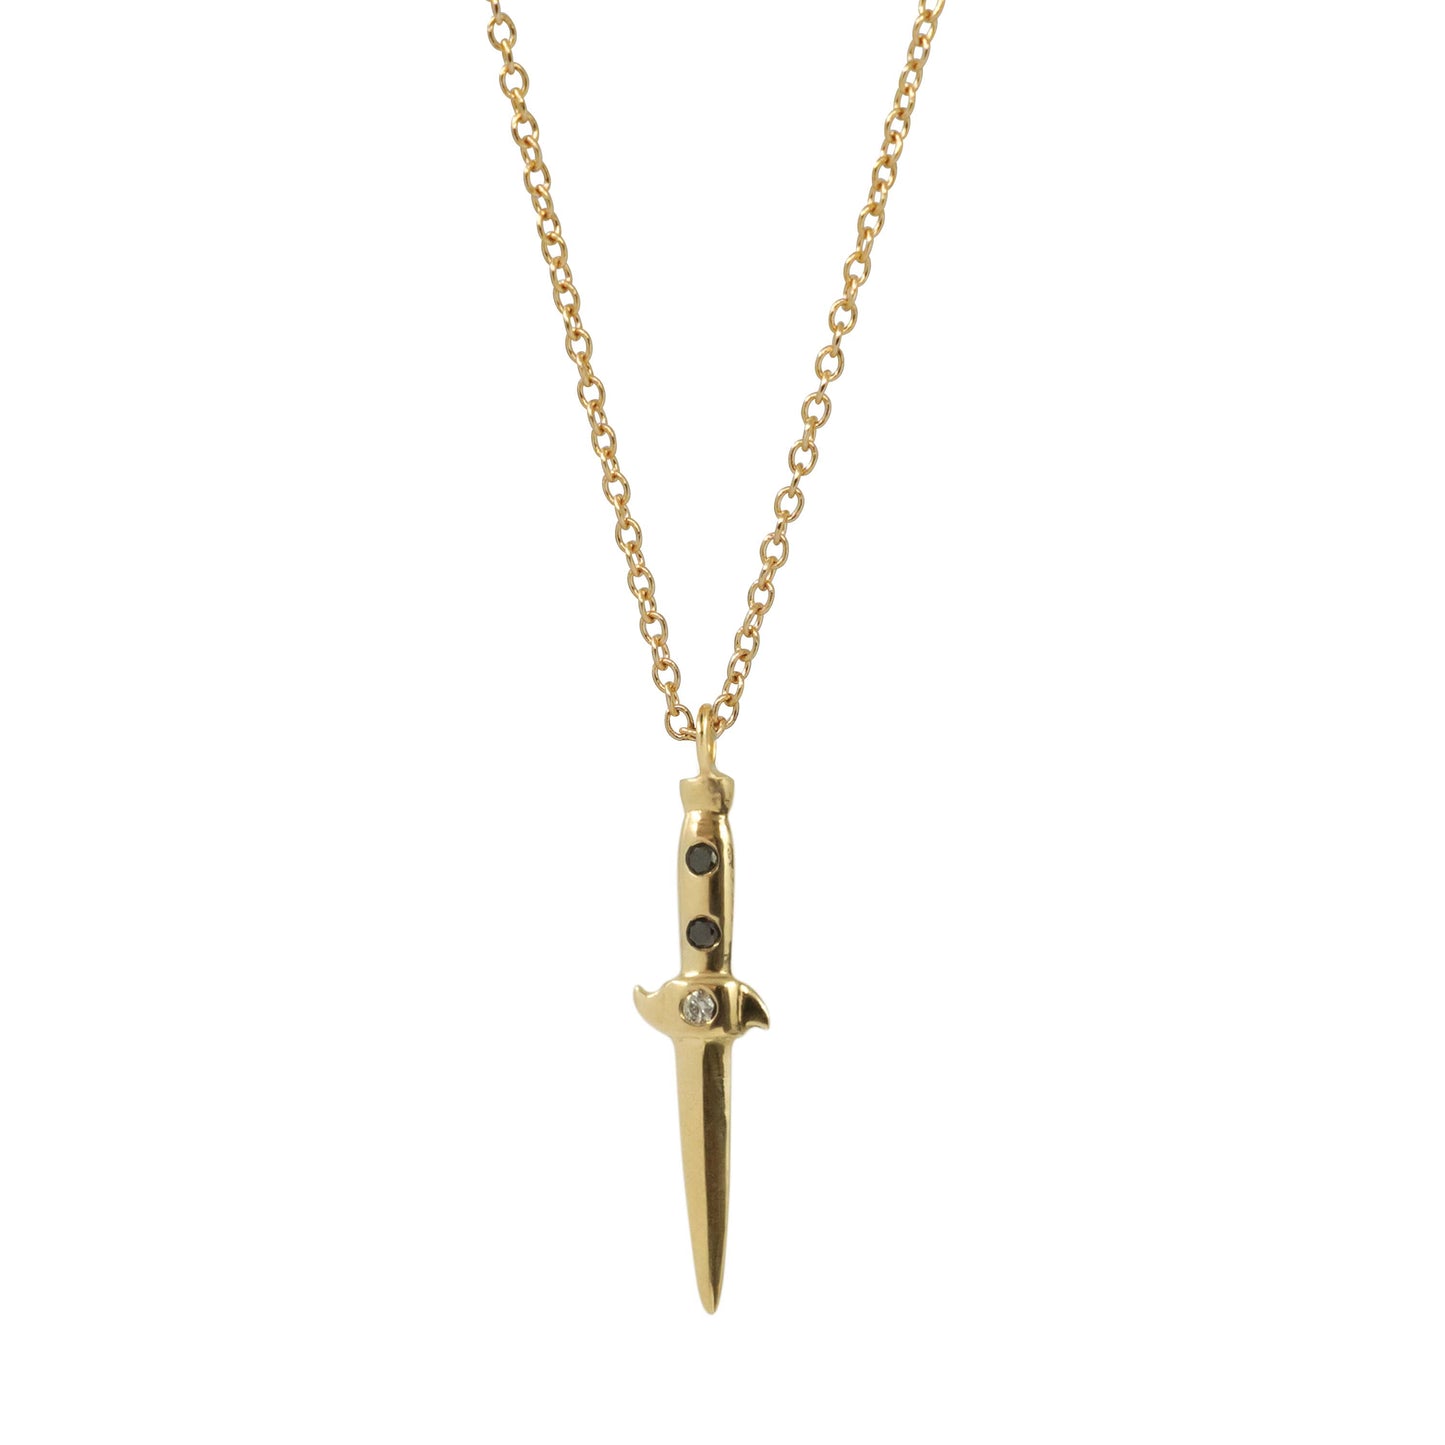 Switchblade Necklace - 14k Yellow Gold